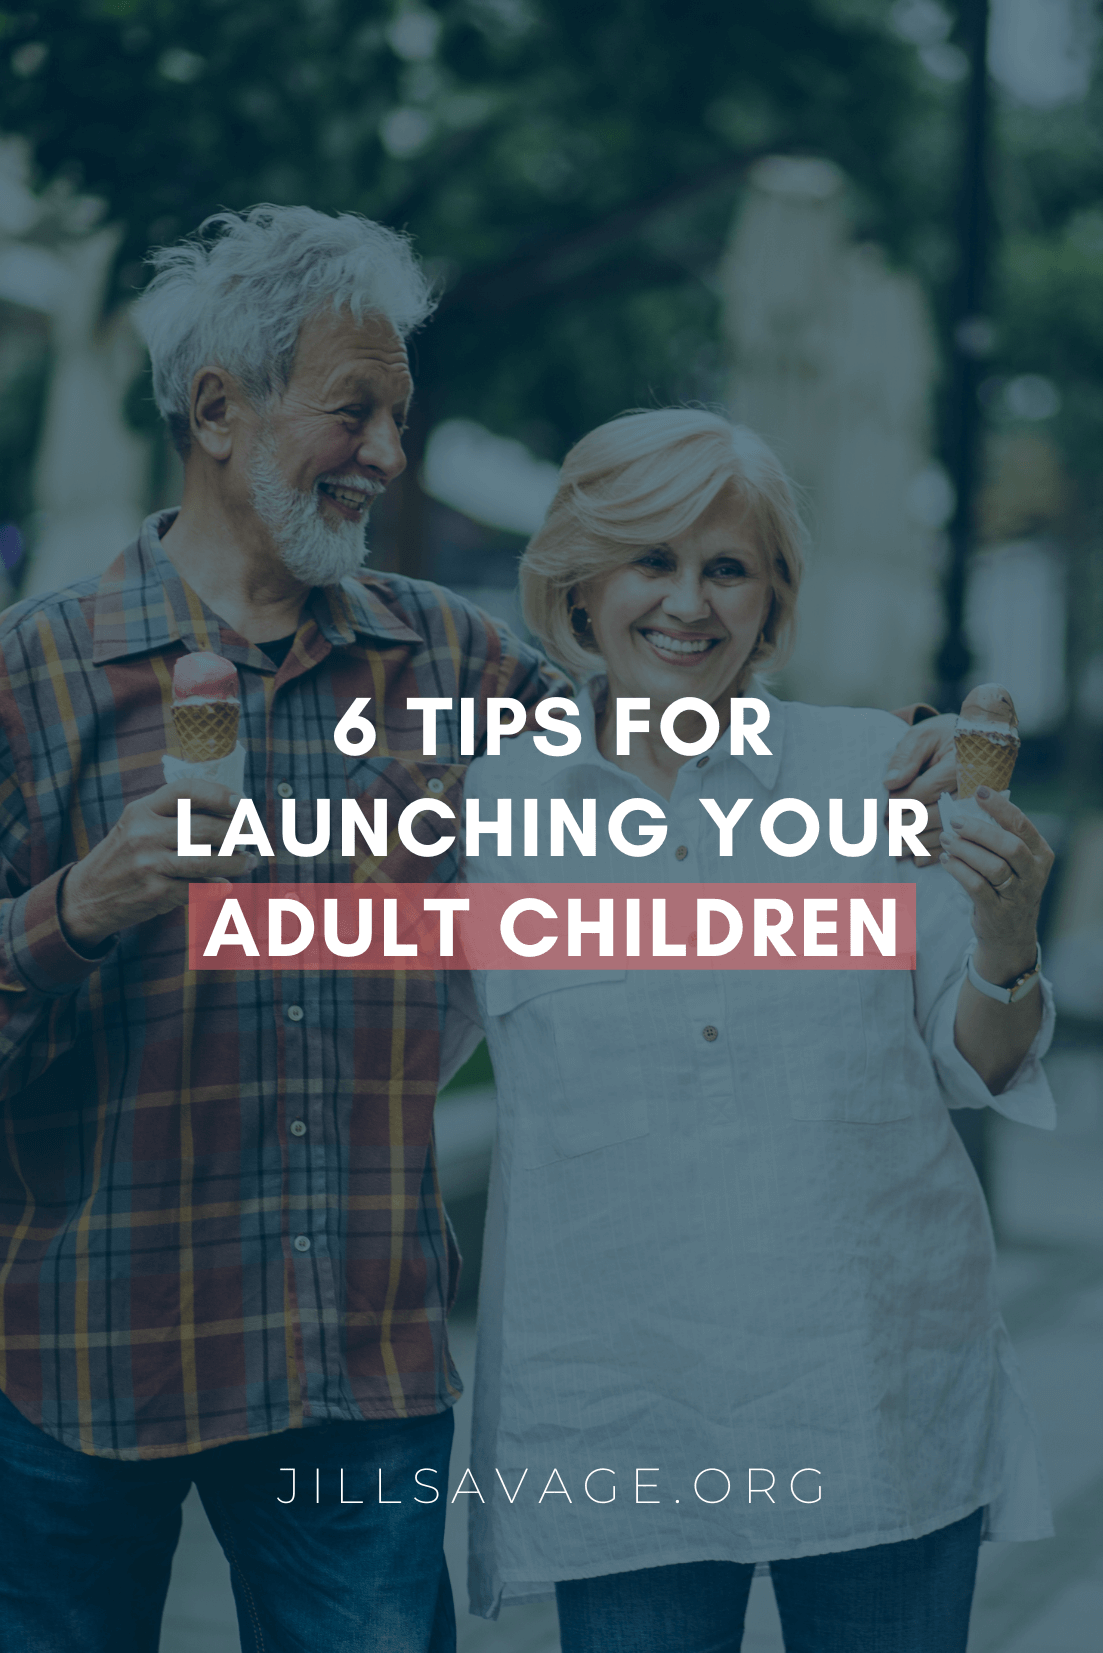 6 Tips for Launching Your Adult Children